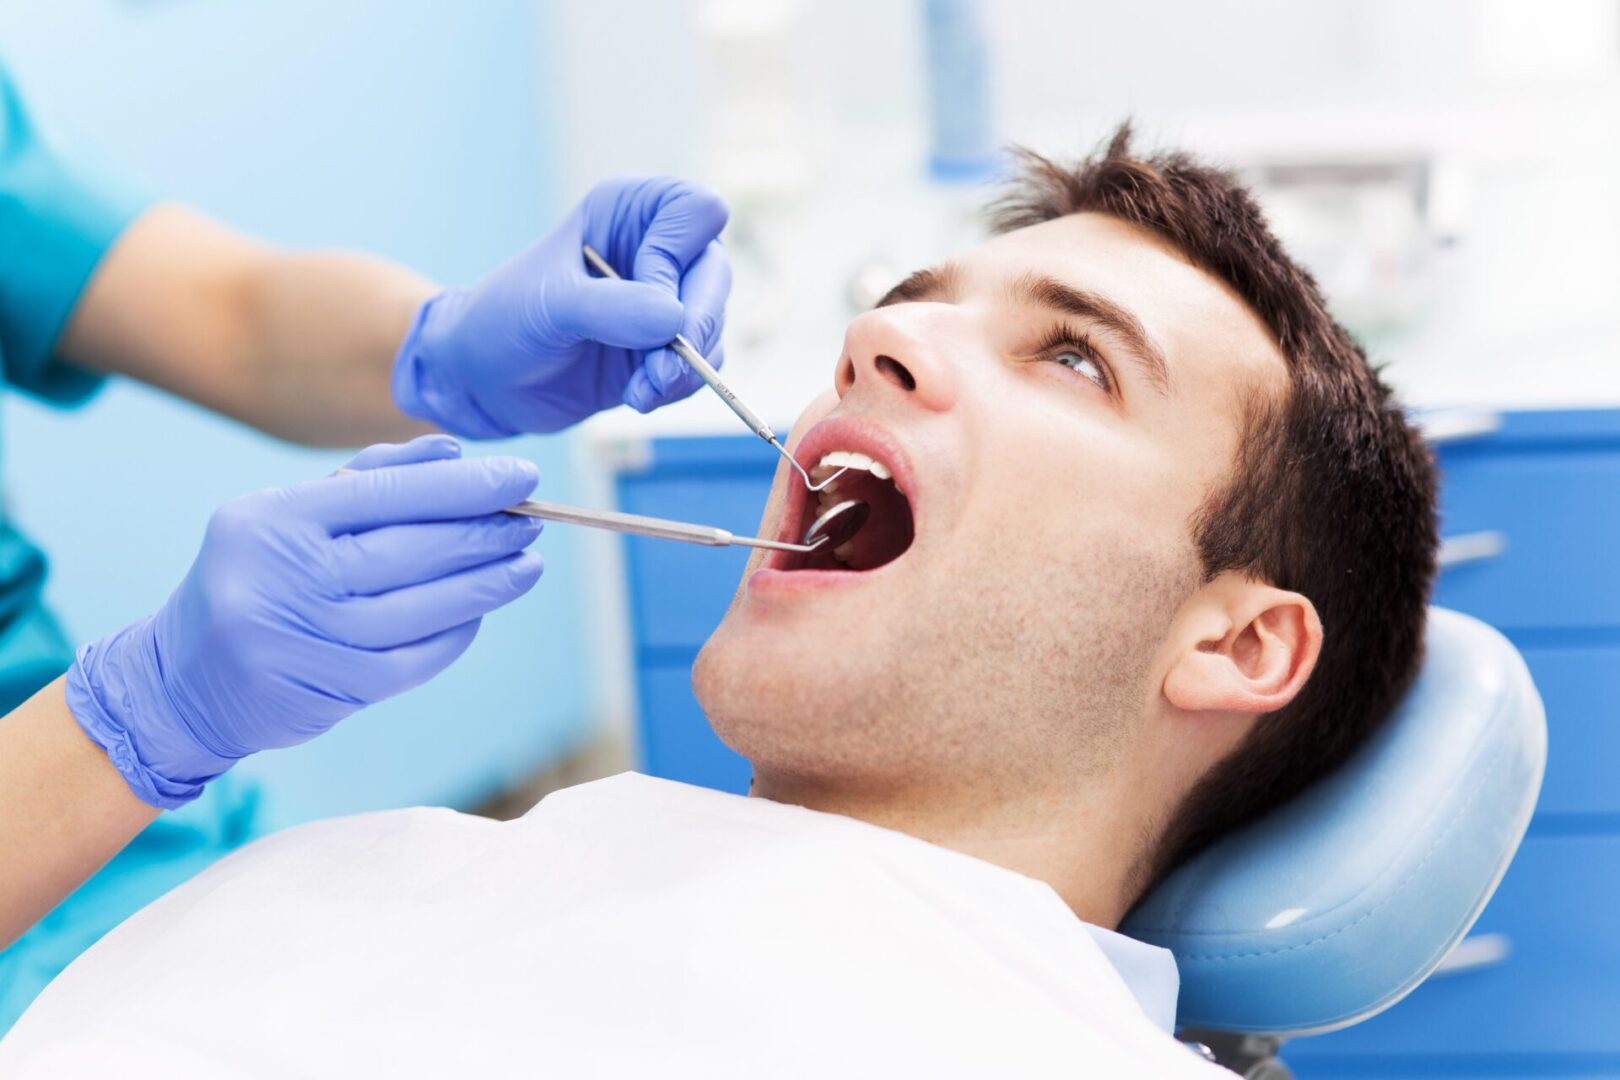 A man is getting his teeth examined by an dentist.